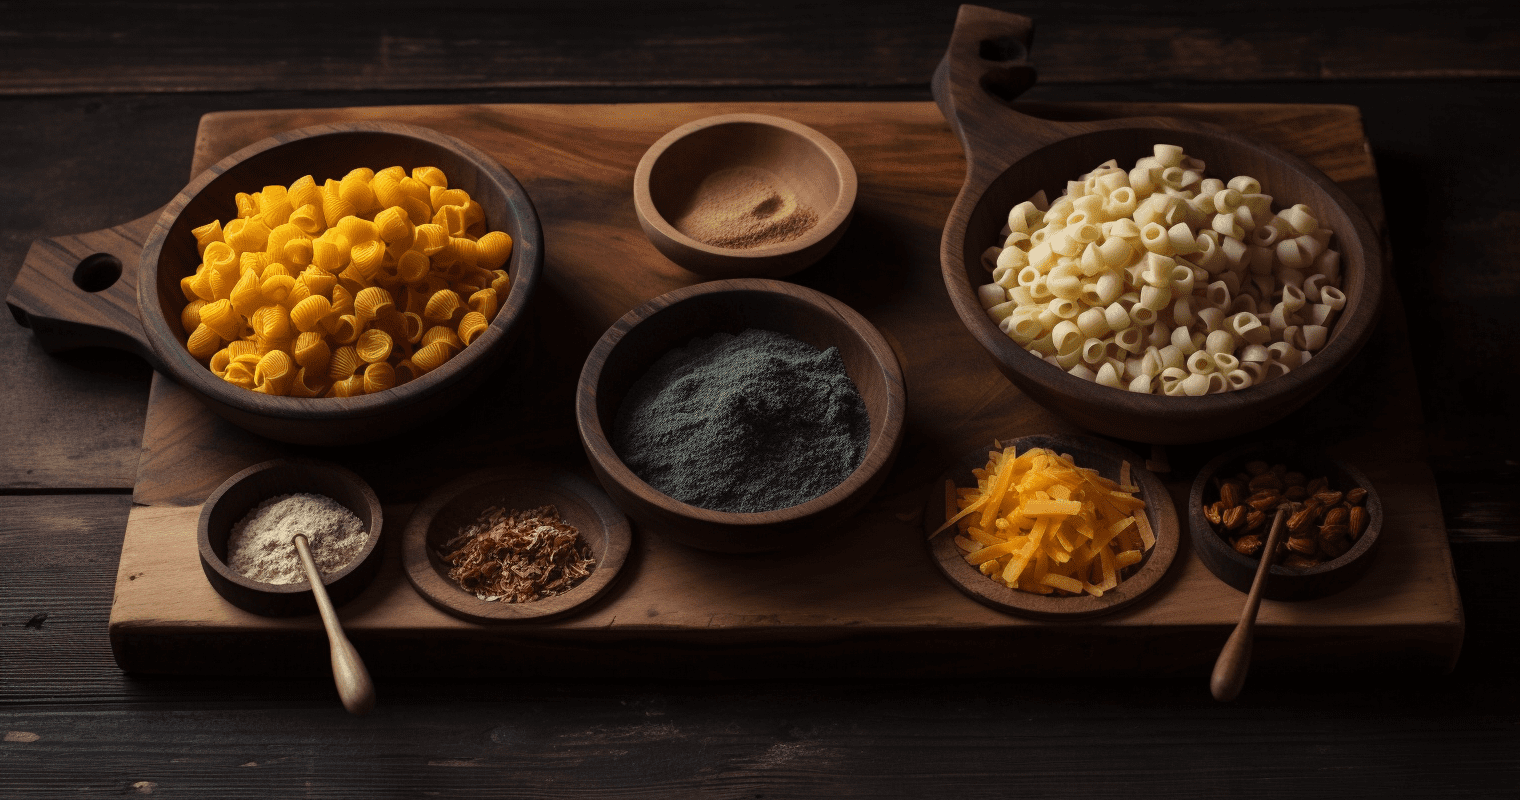 Mac and Cheese Ingredients